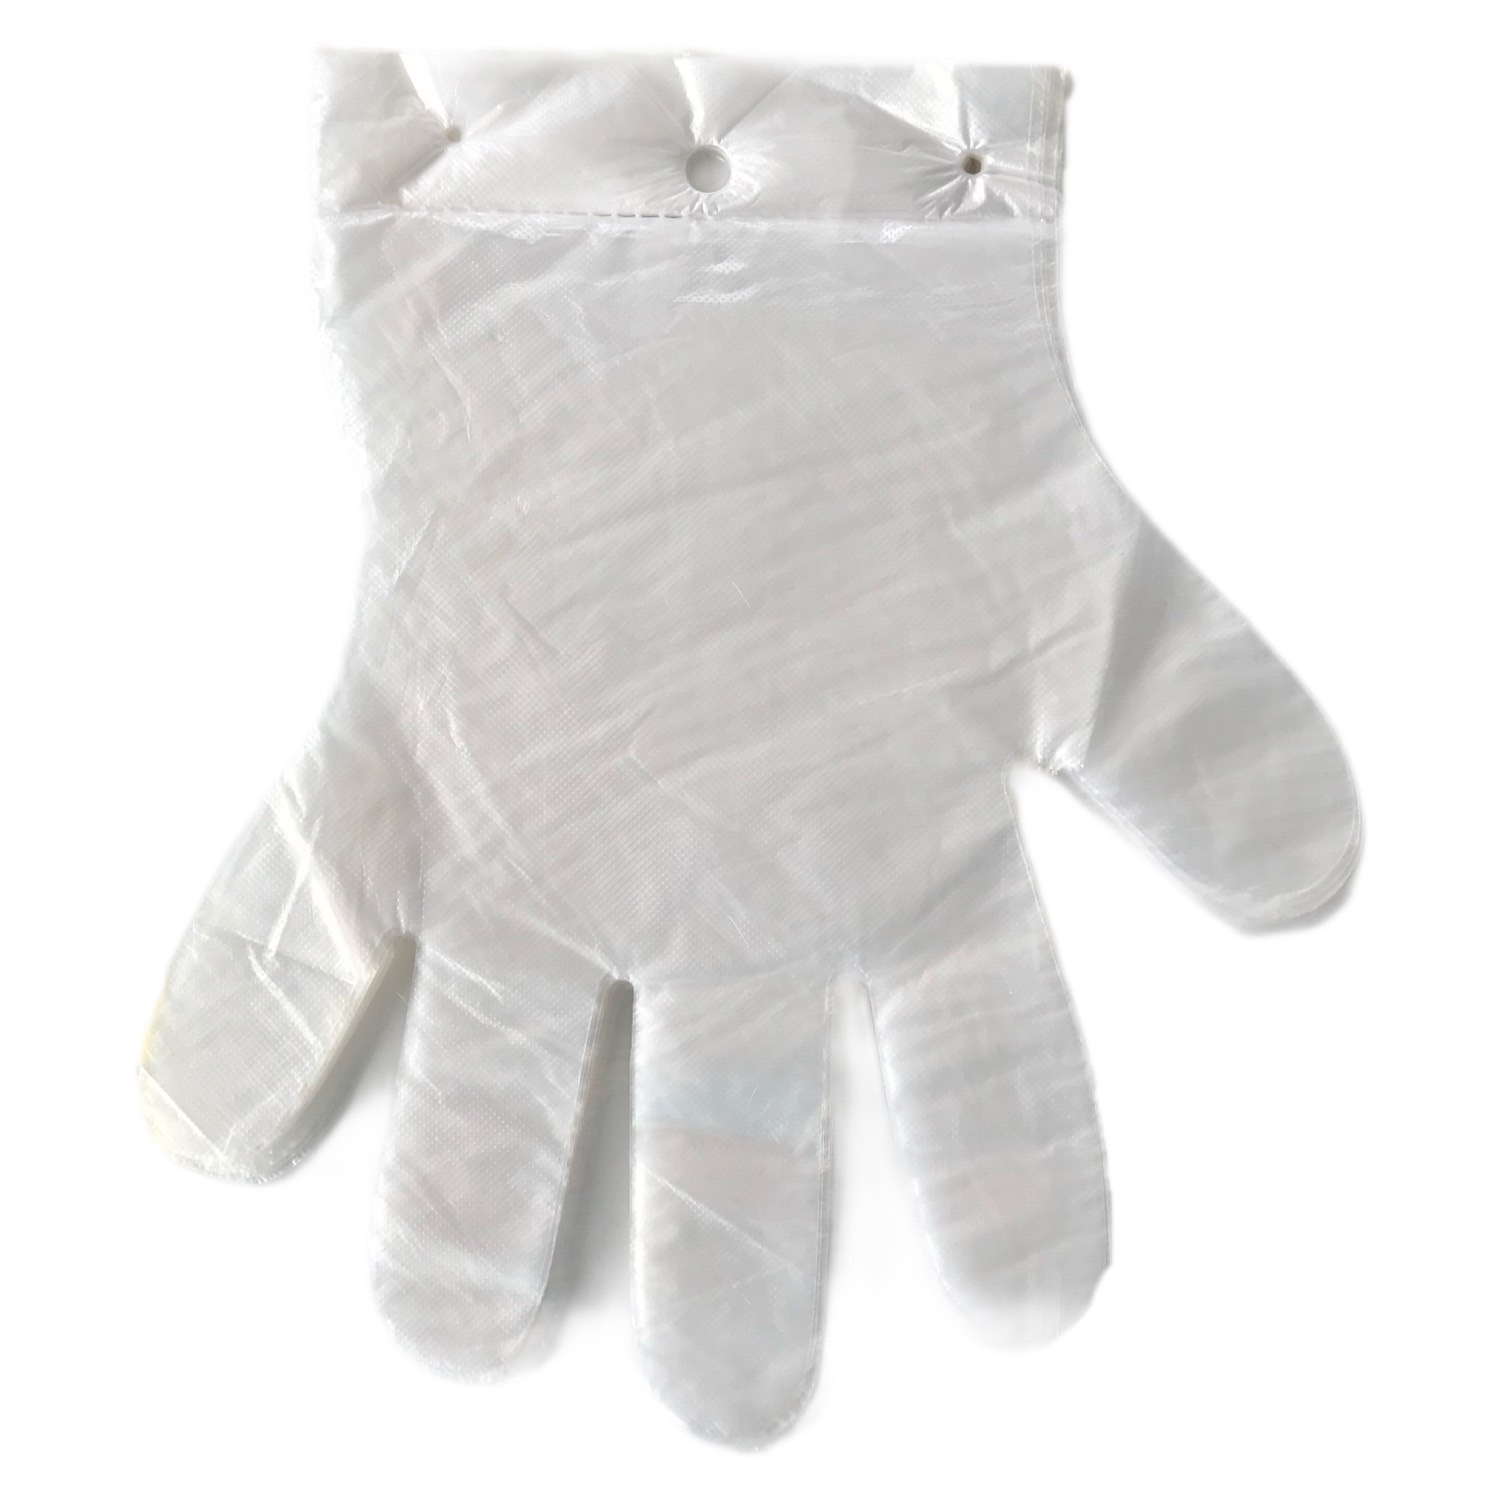 0.8g PE Disposable Gloves with Holes